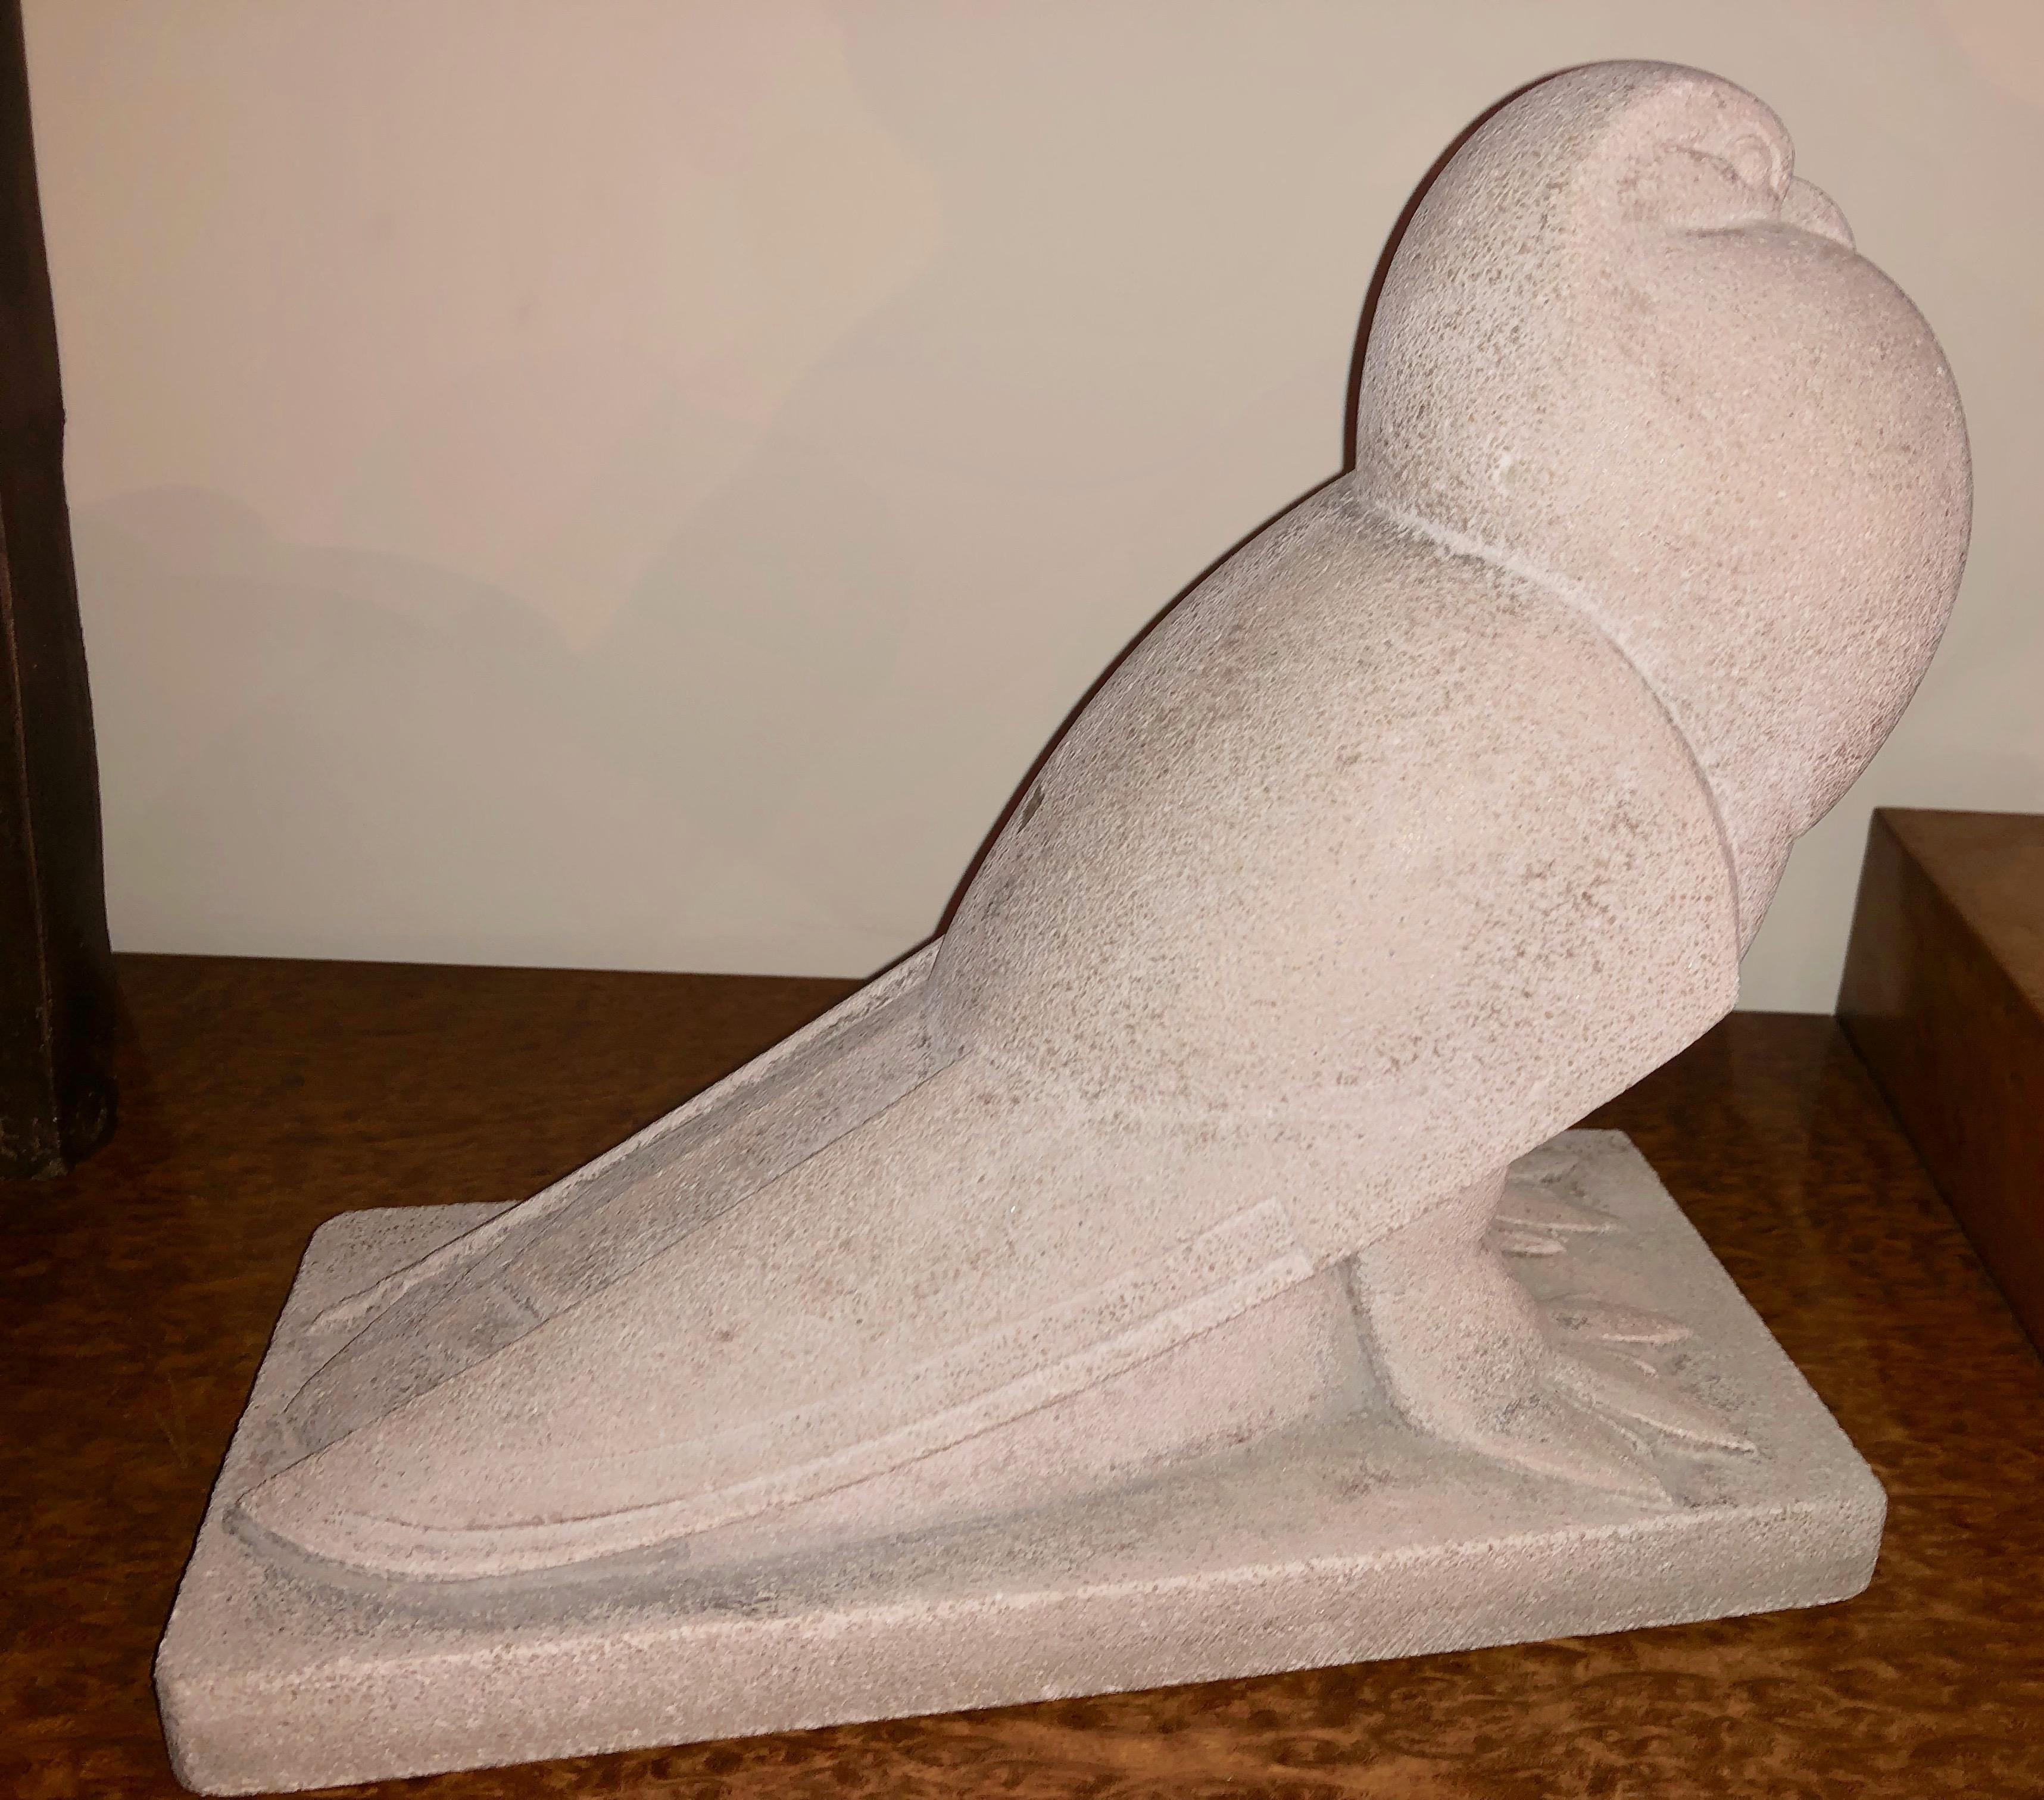 Rare and beautiful original stone by Jan and Joel Martel. Image of a stylized cubist pigeon (flat tail pigeon). One of their many famous animal pieces as represented in the most important book on Martel’s work. These amazing Art Deco artists had an